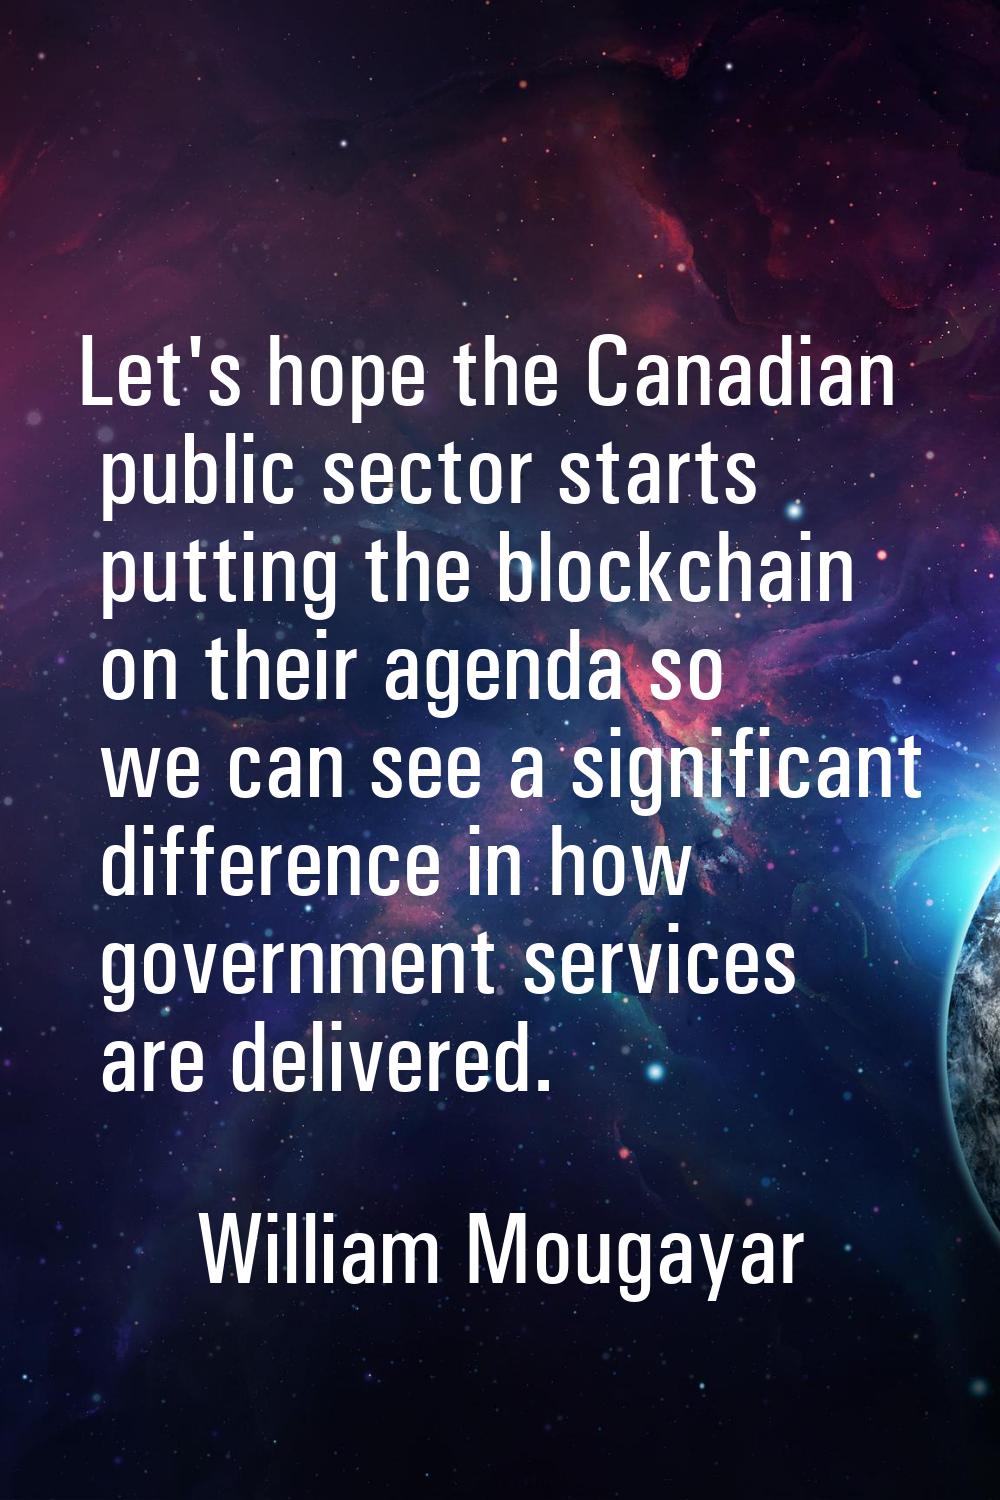 Let's hope the Canadian public sector starts putting the blockchain on their agenda so we can see a